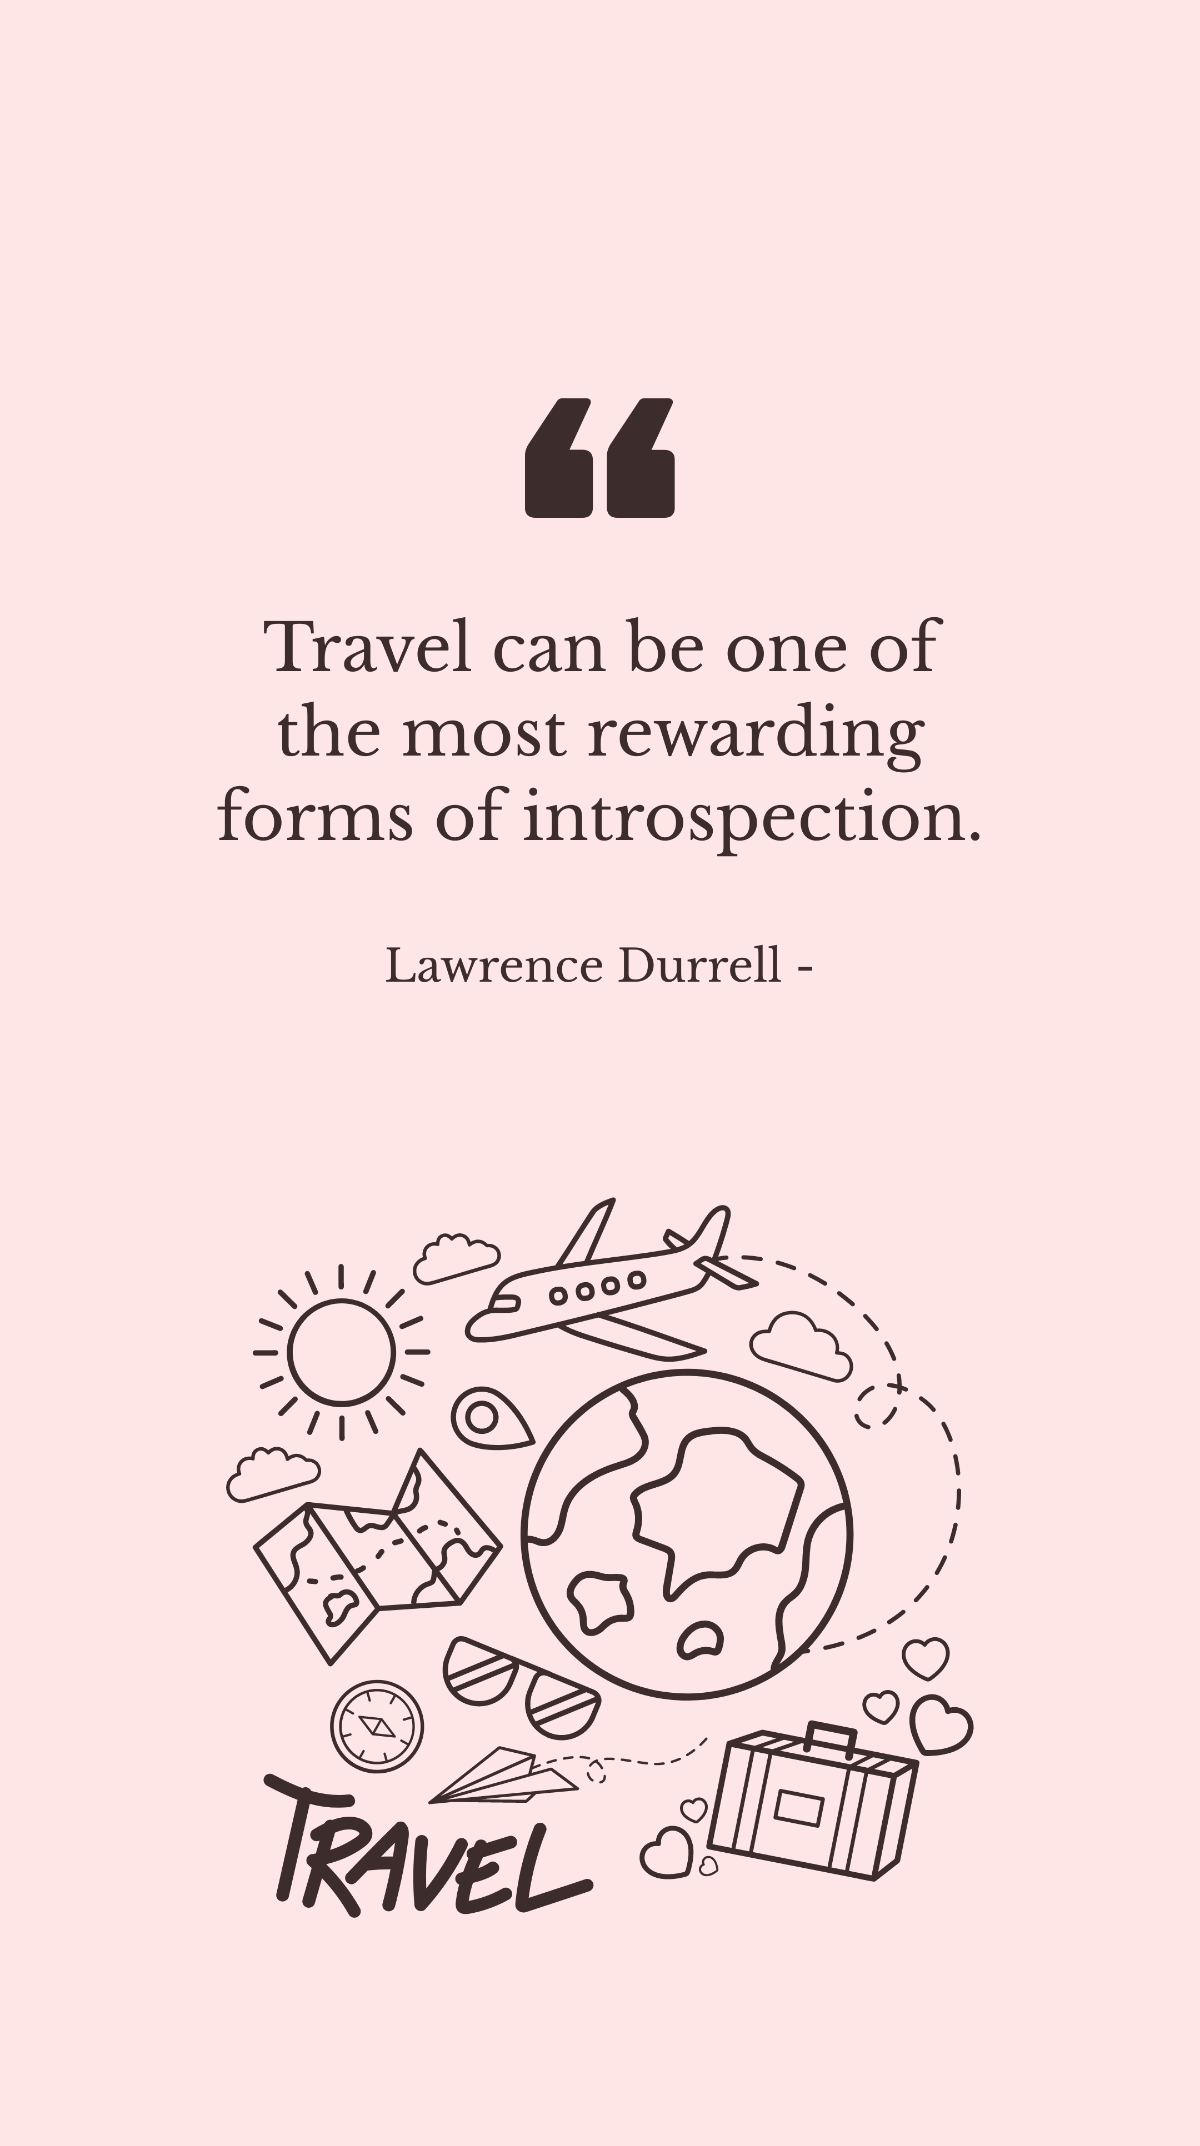 Lawrence Durrell - Travel can be one of the most rewarding forms of introspection. Template